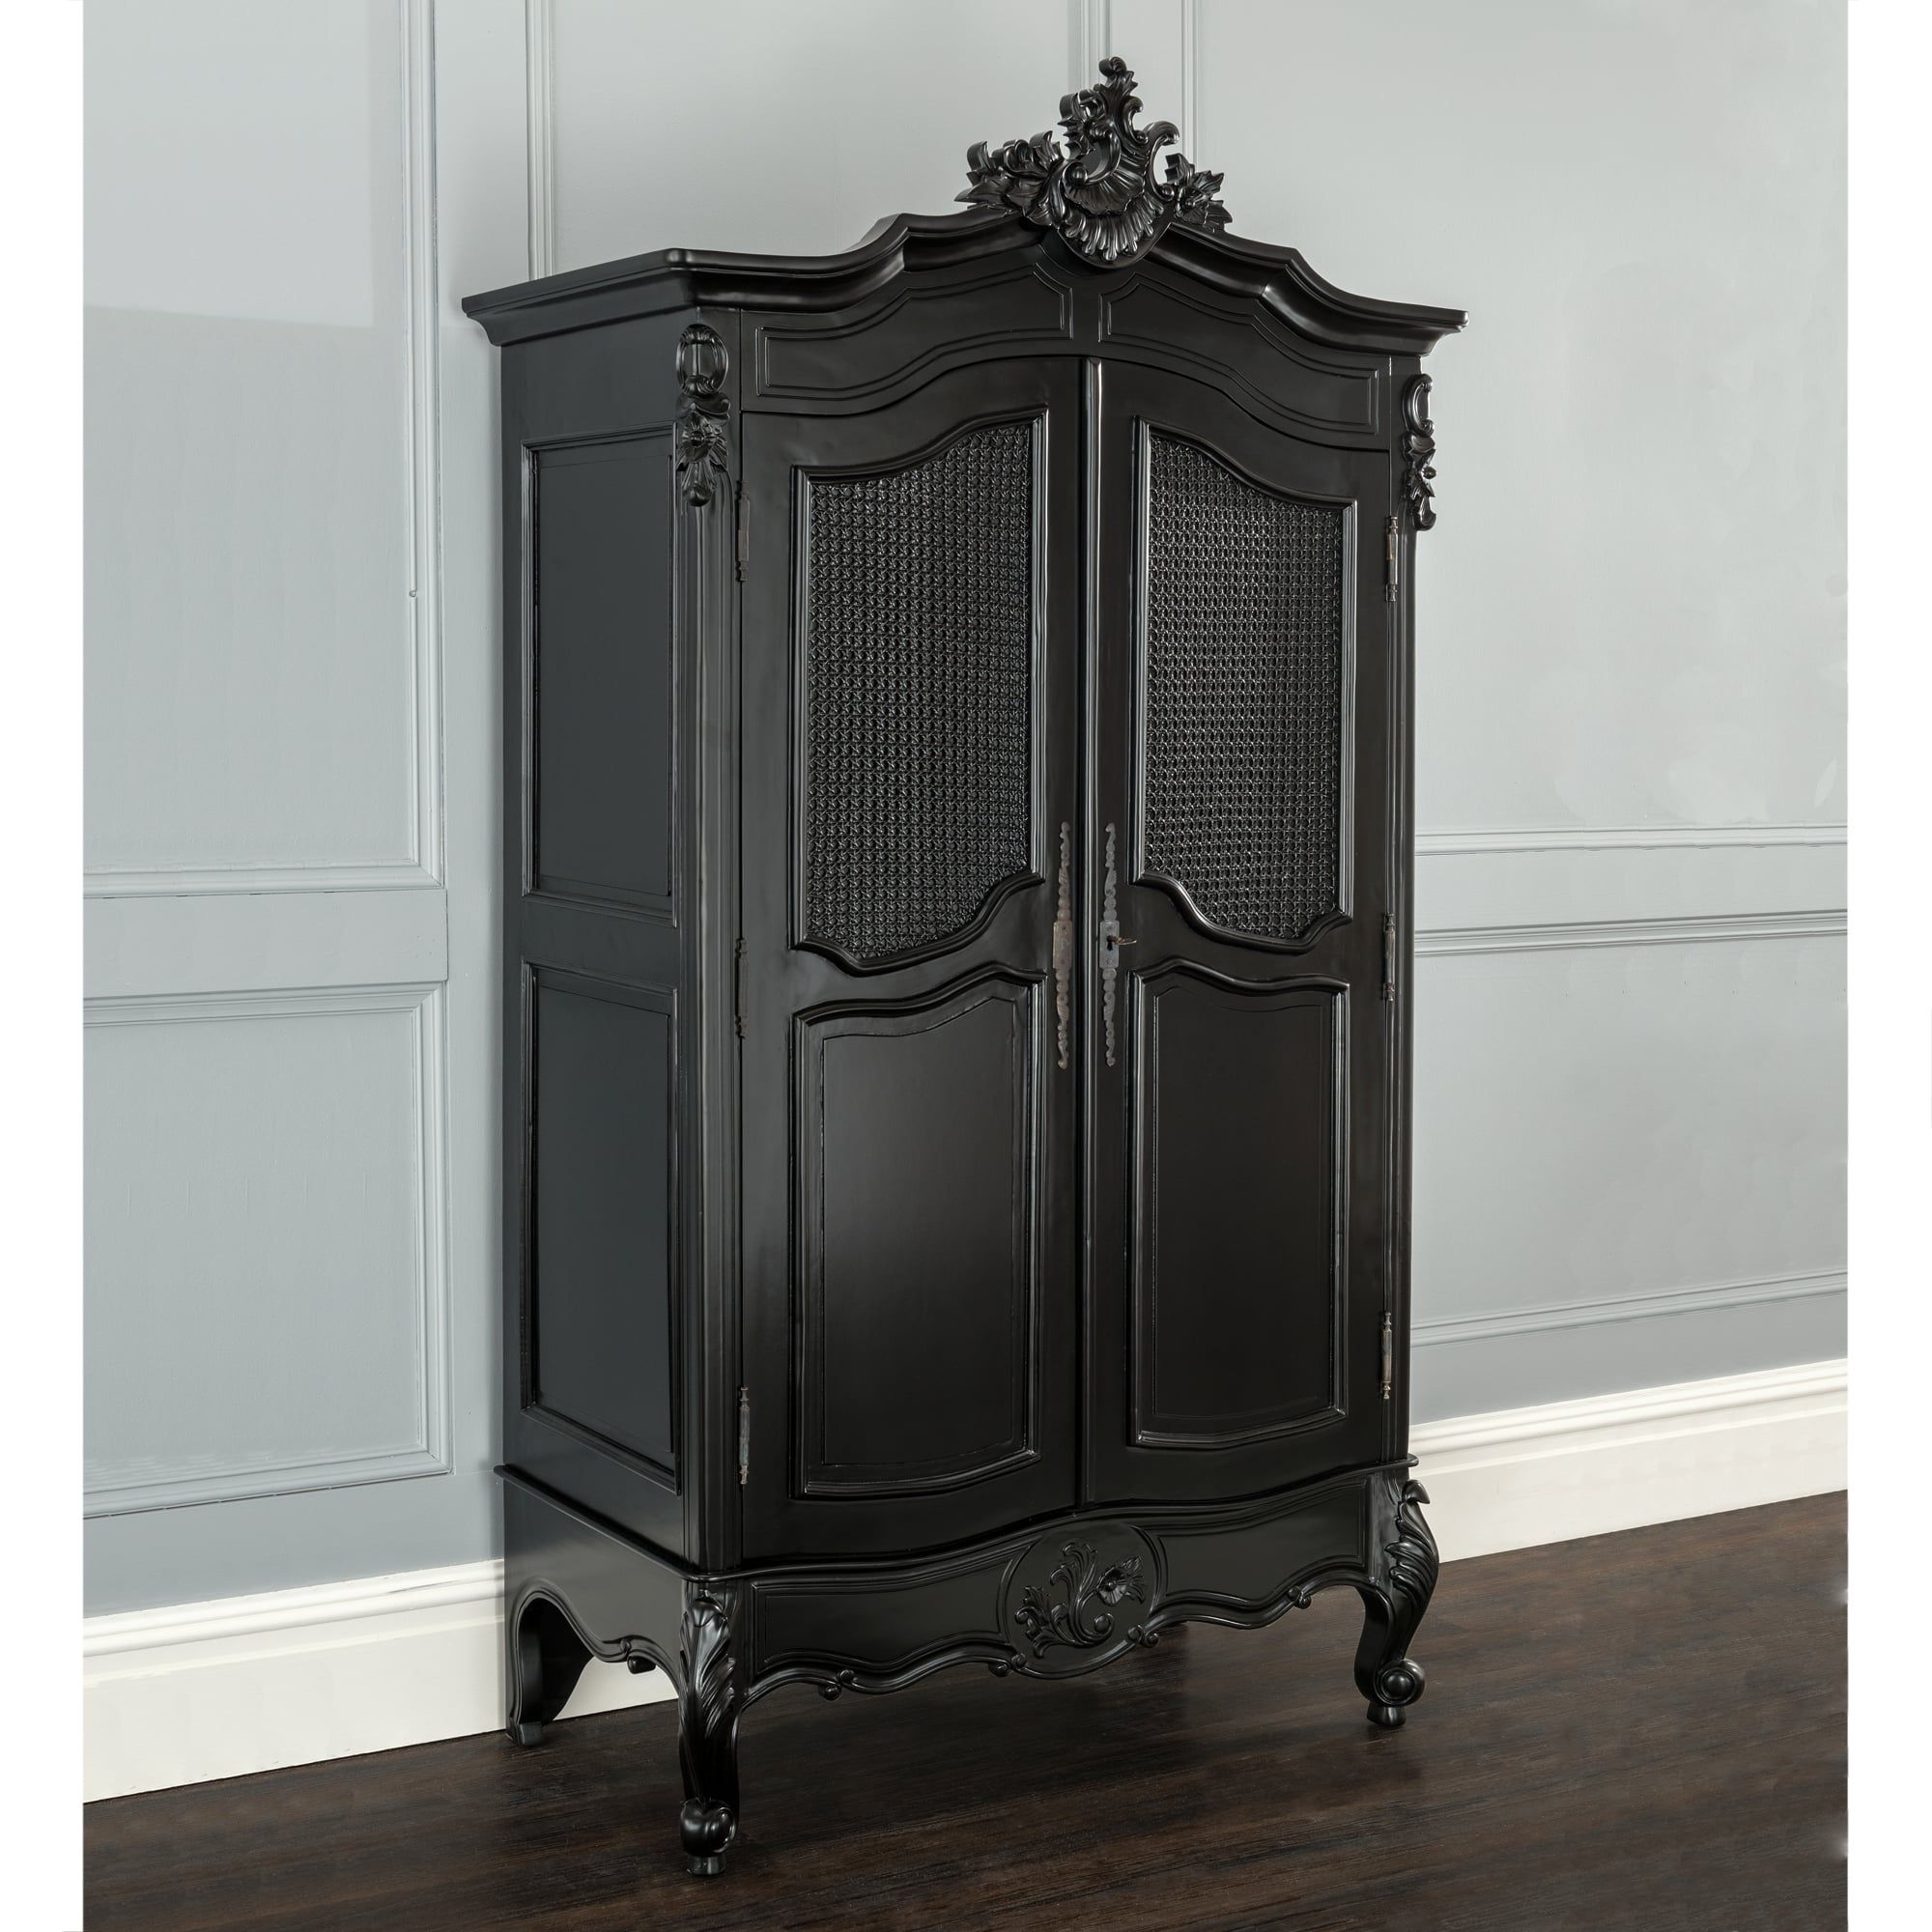 La Rochelle Antique French Wardrobe | Black Painted Furniture Inside Black French Wardrobes (Photo 2 of 15)